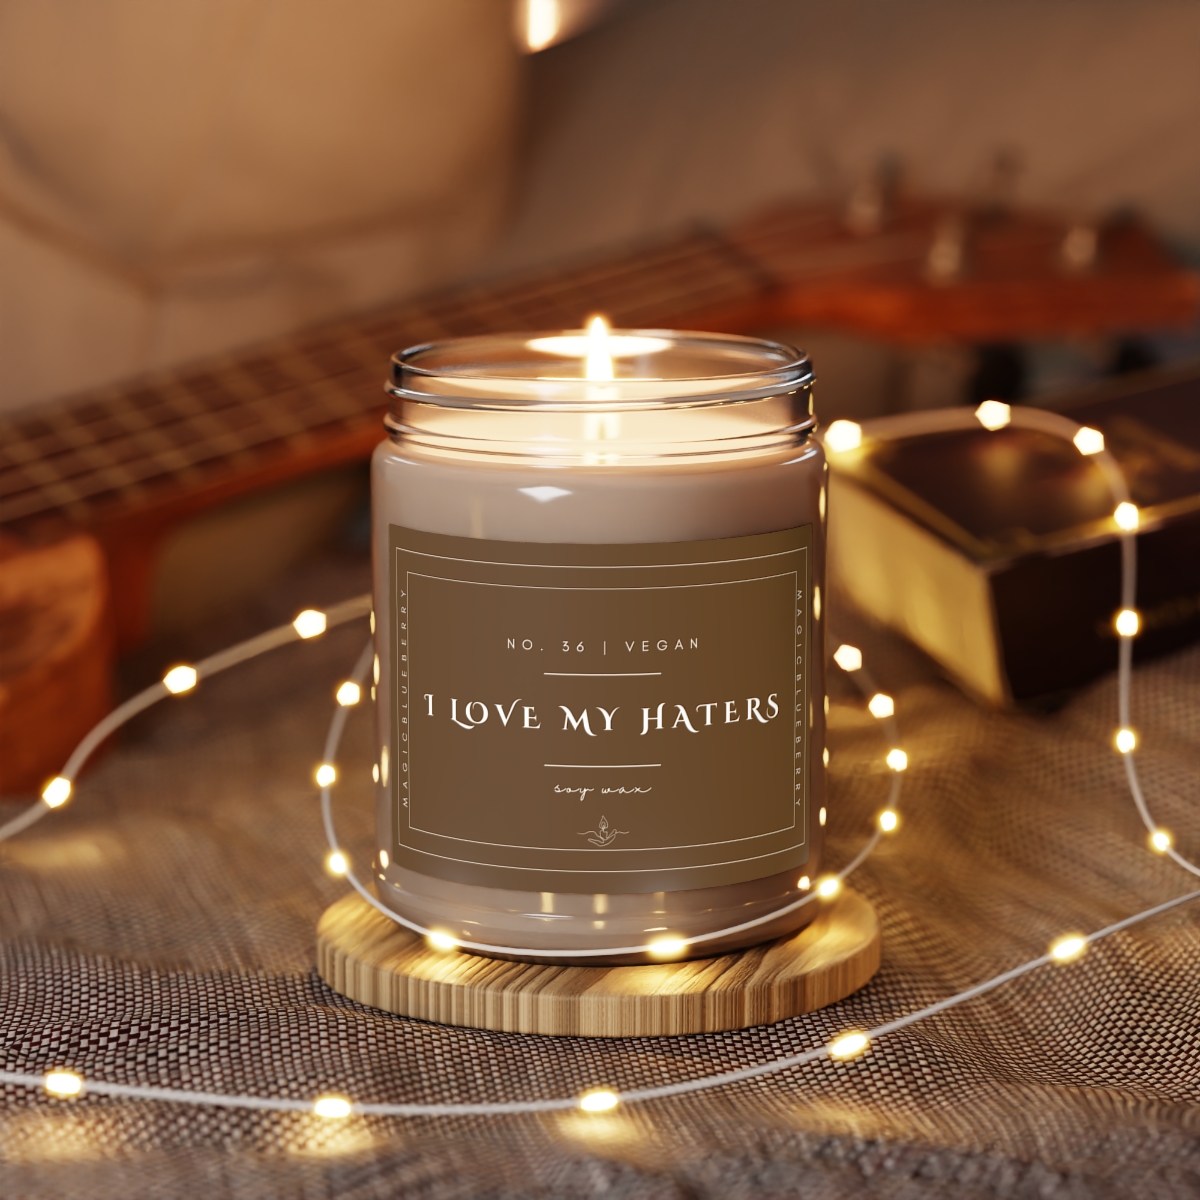 I Love My Haters - Scented Soy Wax Candle | Clear Jar | Vegan Candle | Coconut Soy Candle 9oz | Aromatherapy product main image